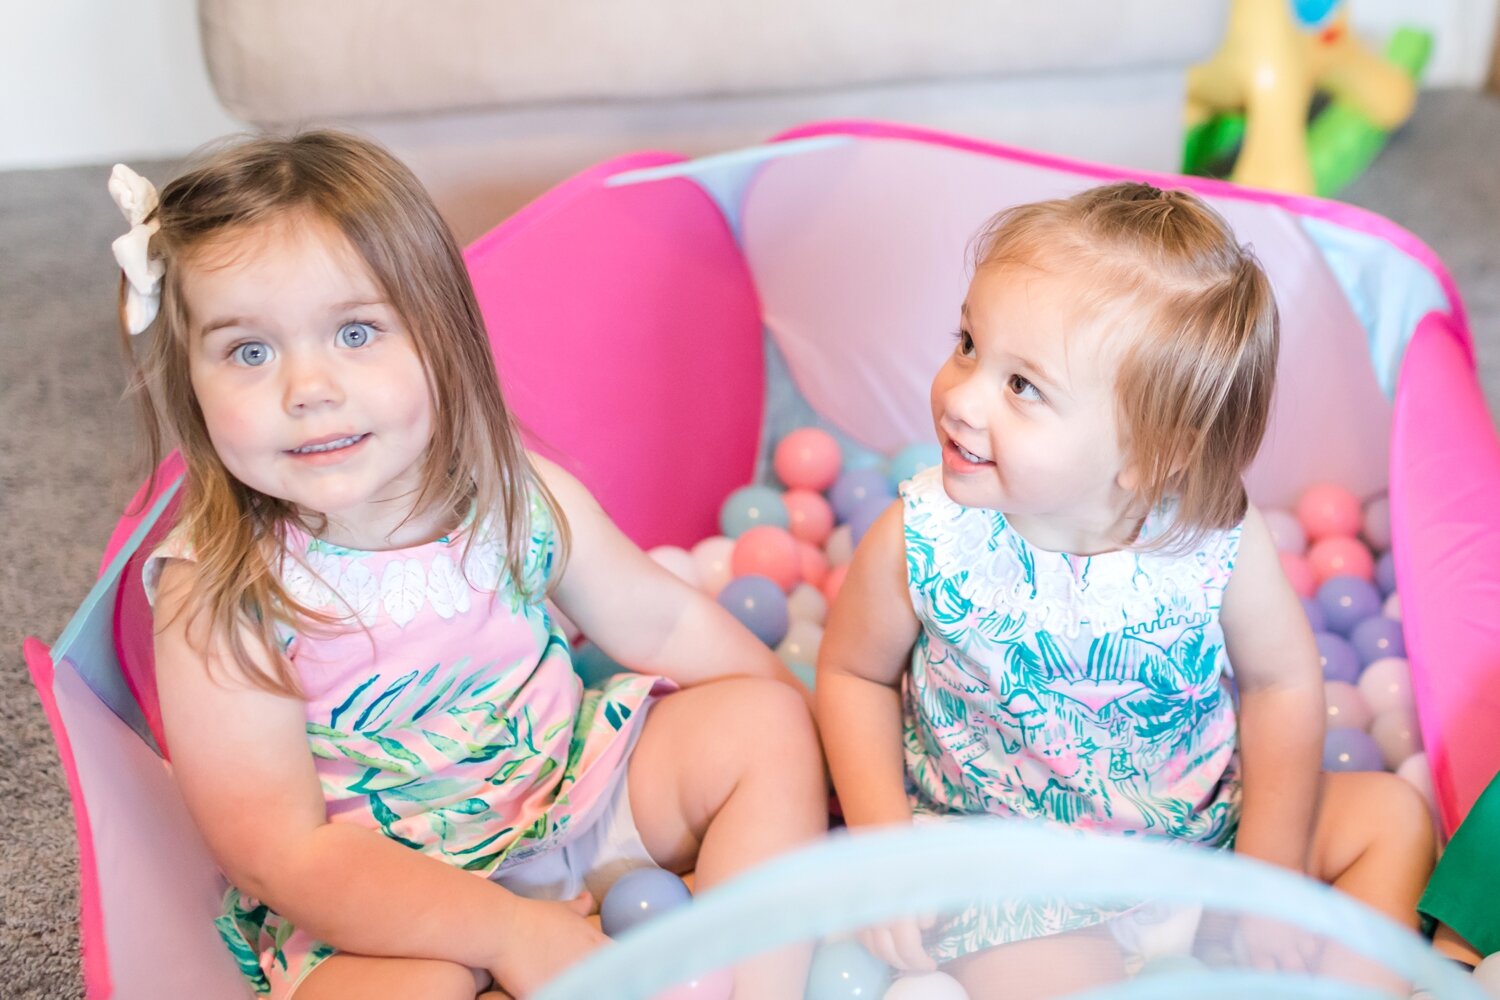  These two are too cute in their matching Lilly! 